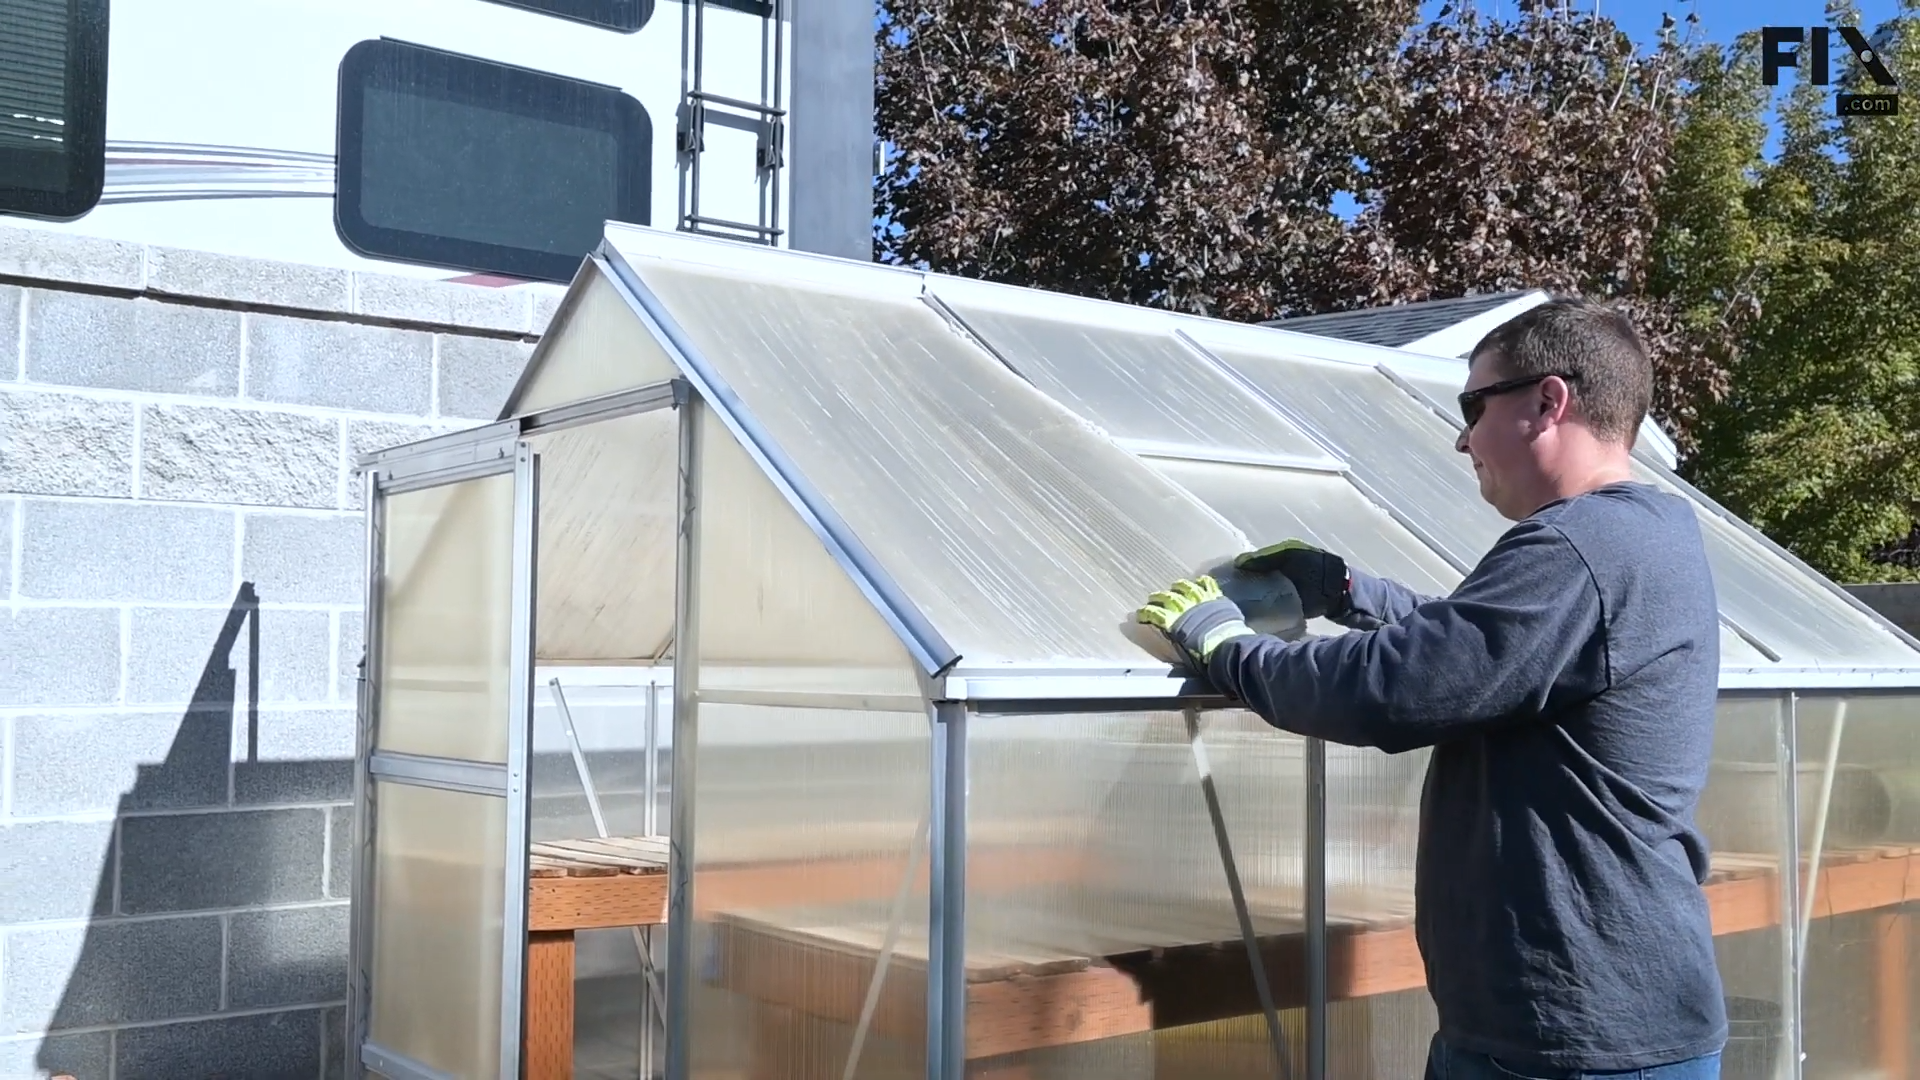 Expert technician wearing protective gloves and removing a roof panel from a greenhouse using their hands